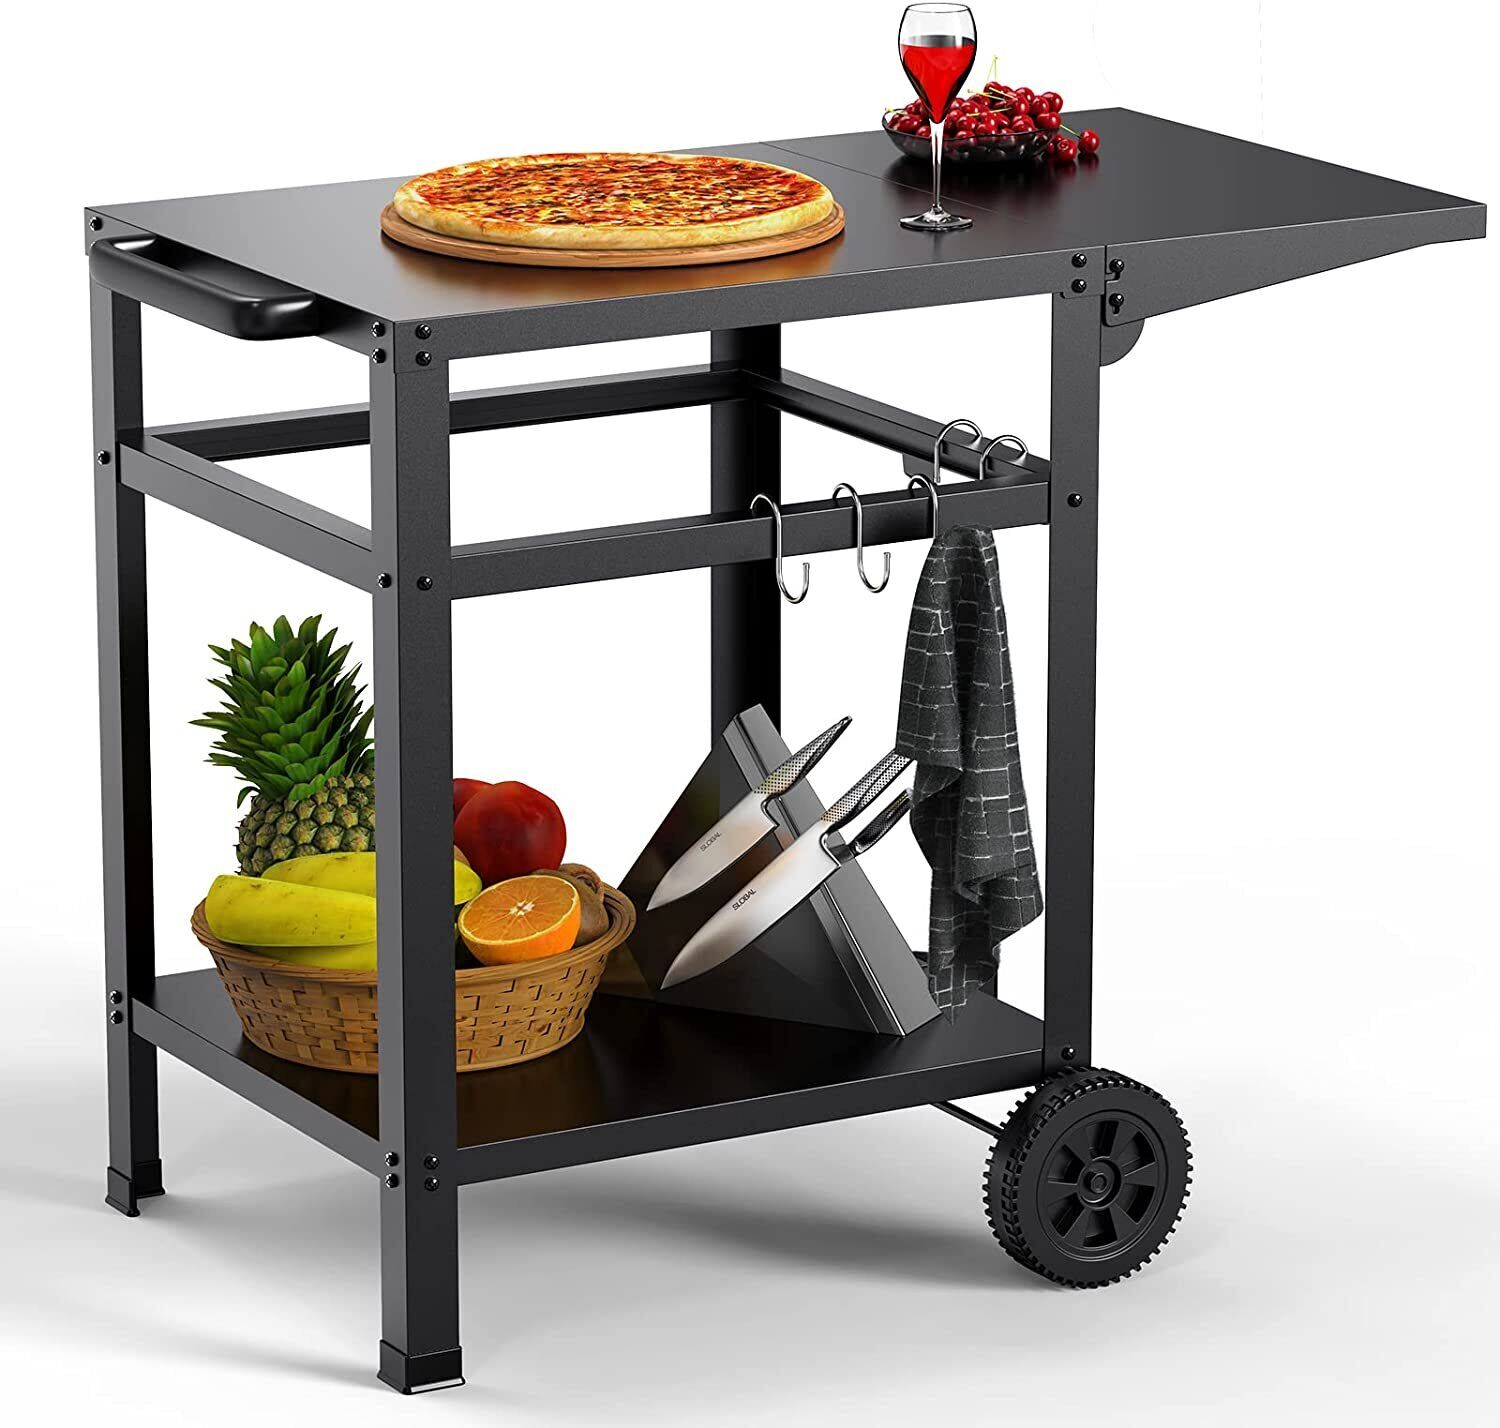 New Outdoor Dining Cart Double-shelf Movable Table Pizza Oven Trolley Bbq Stand